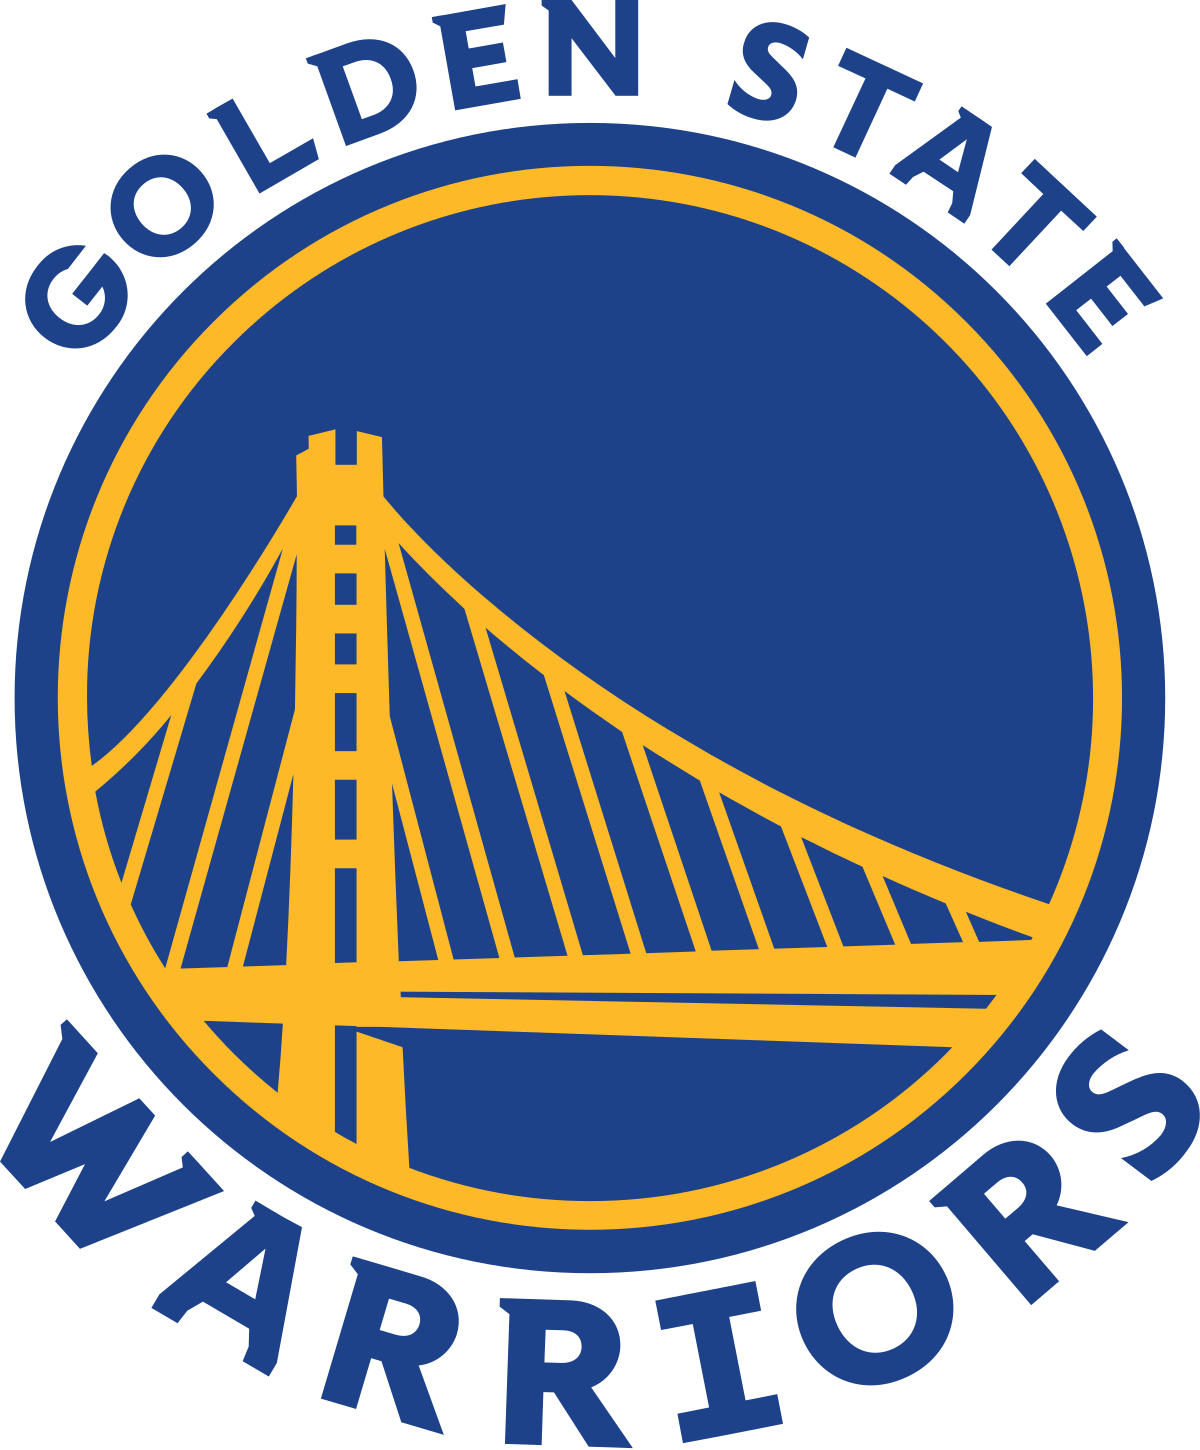 Detroit Pistons vs. Golden State Warriors odds, selections, and forecasts